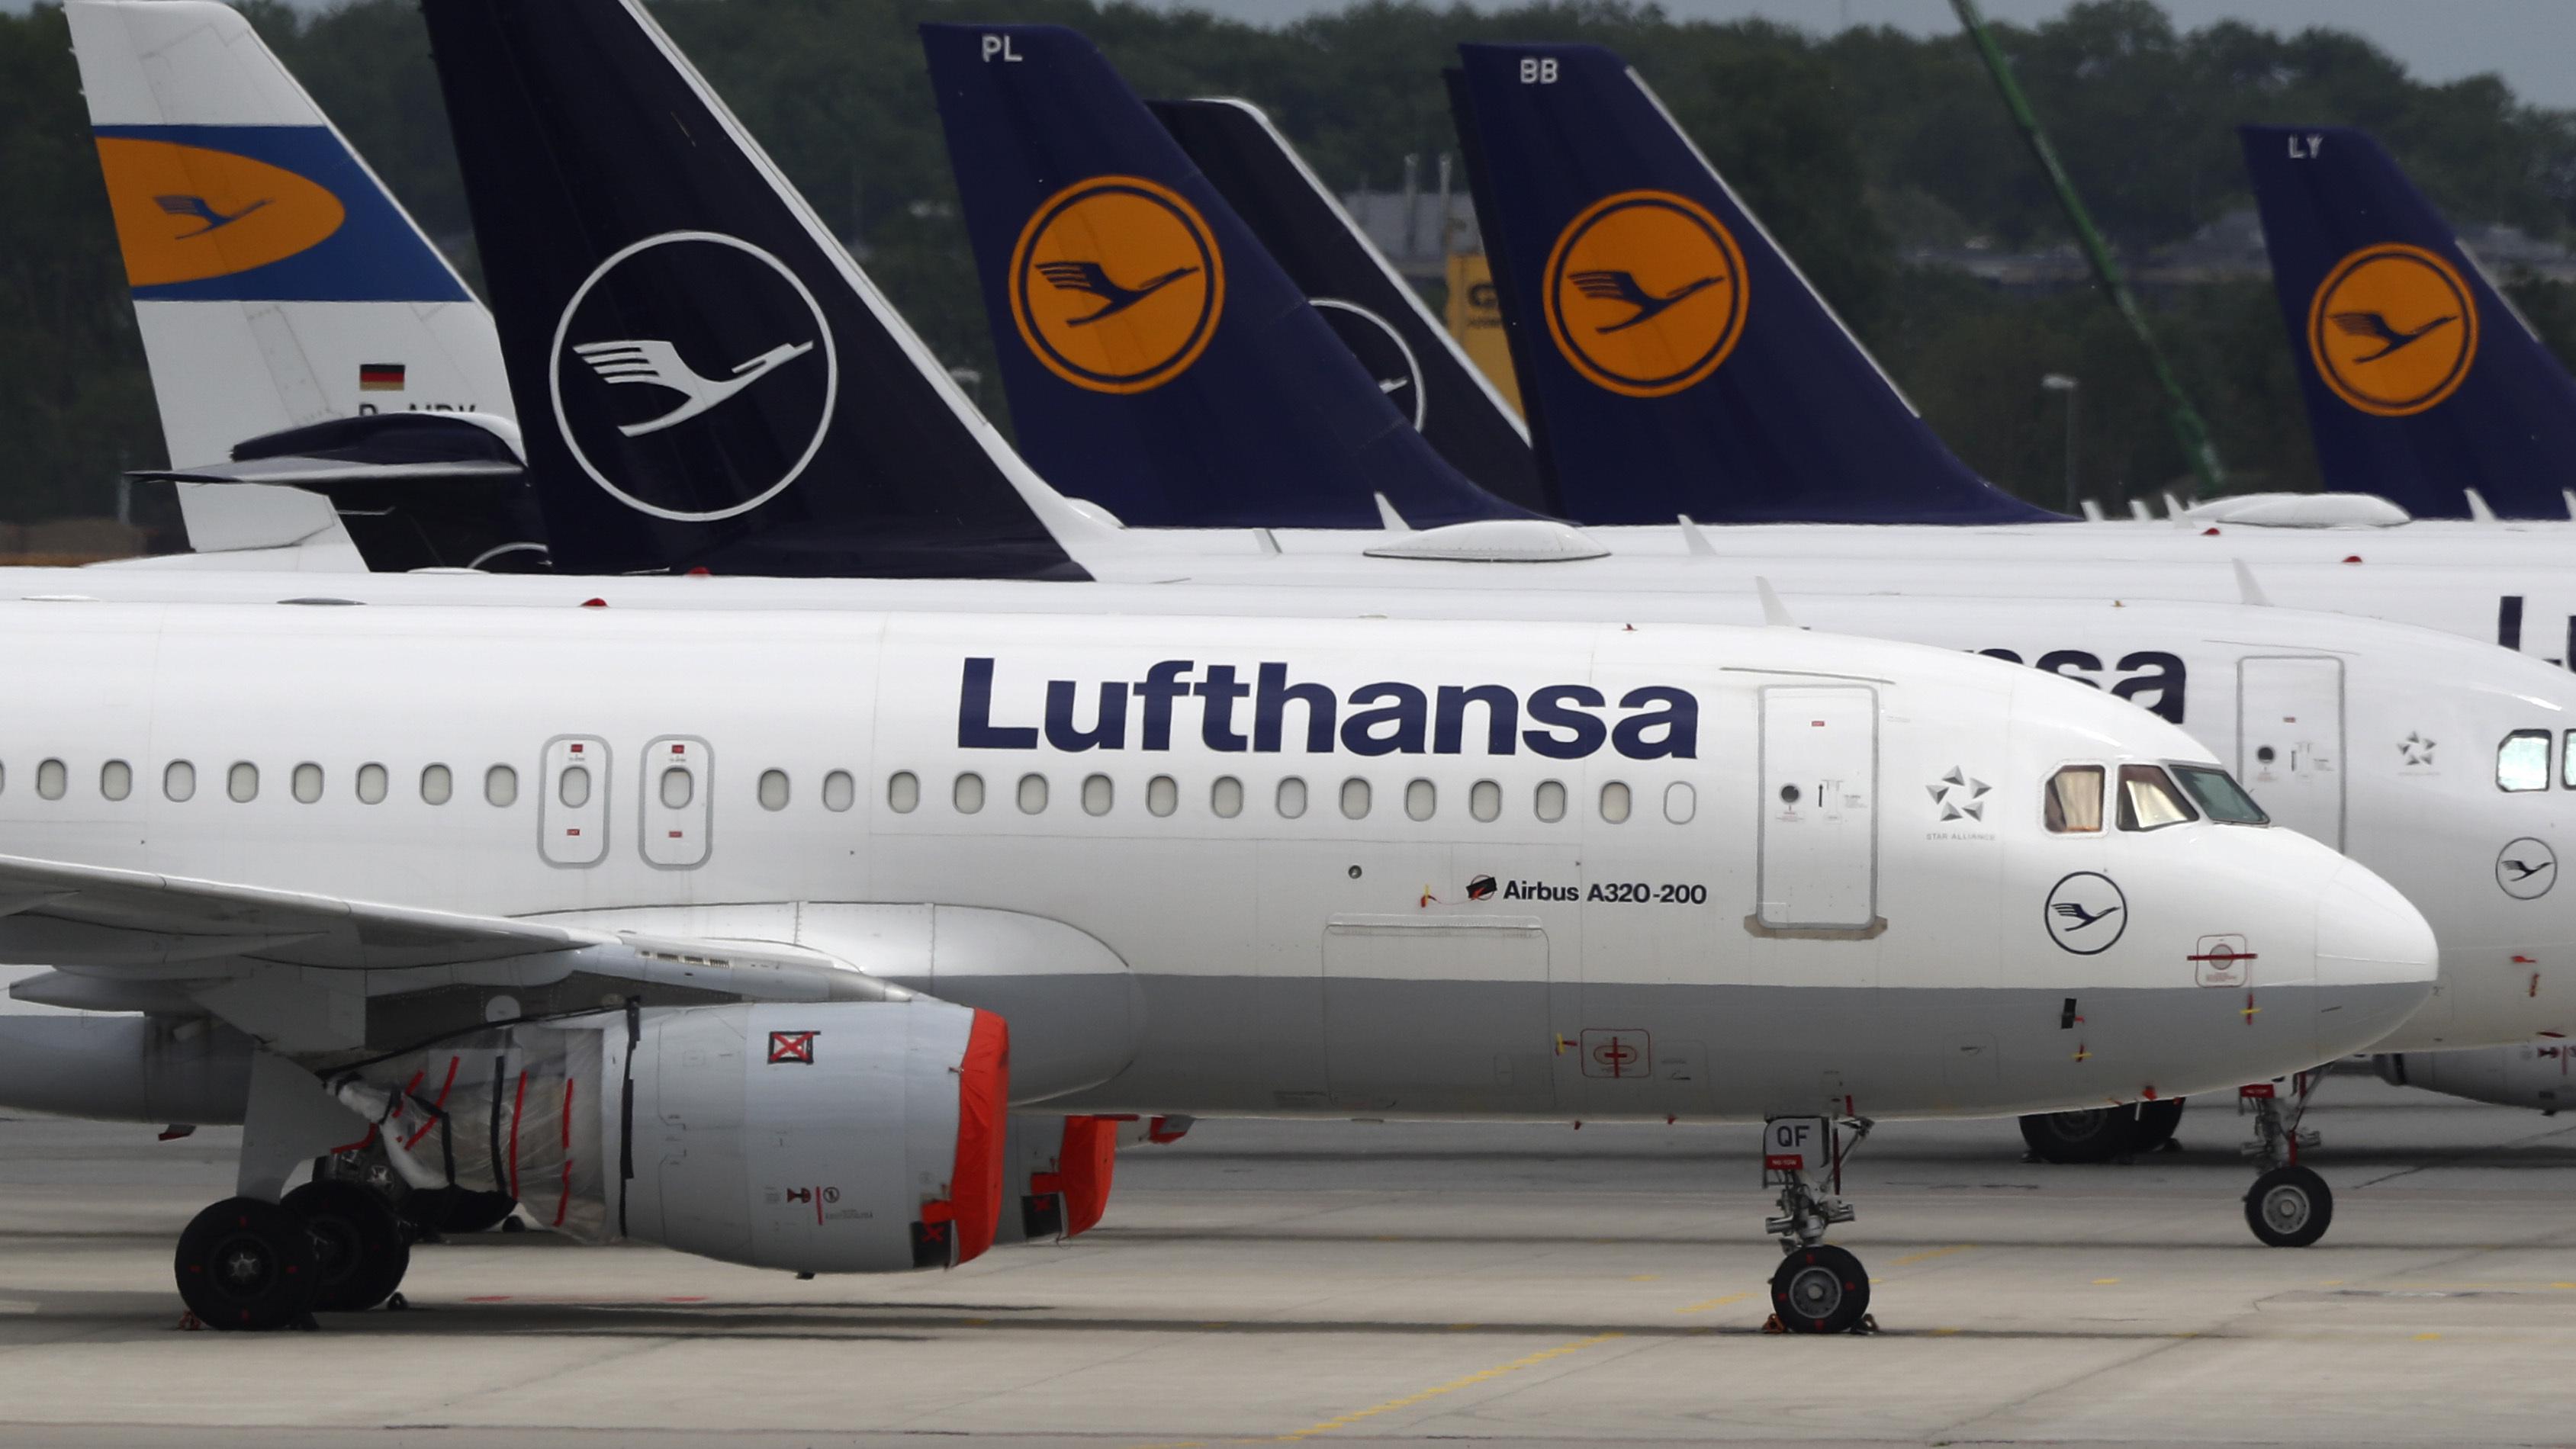 Lufthansa cancels many flights Friday due to pilots’ strike.